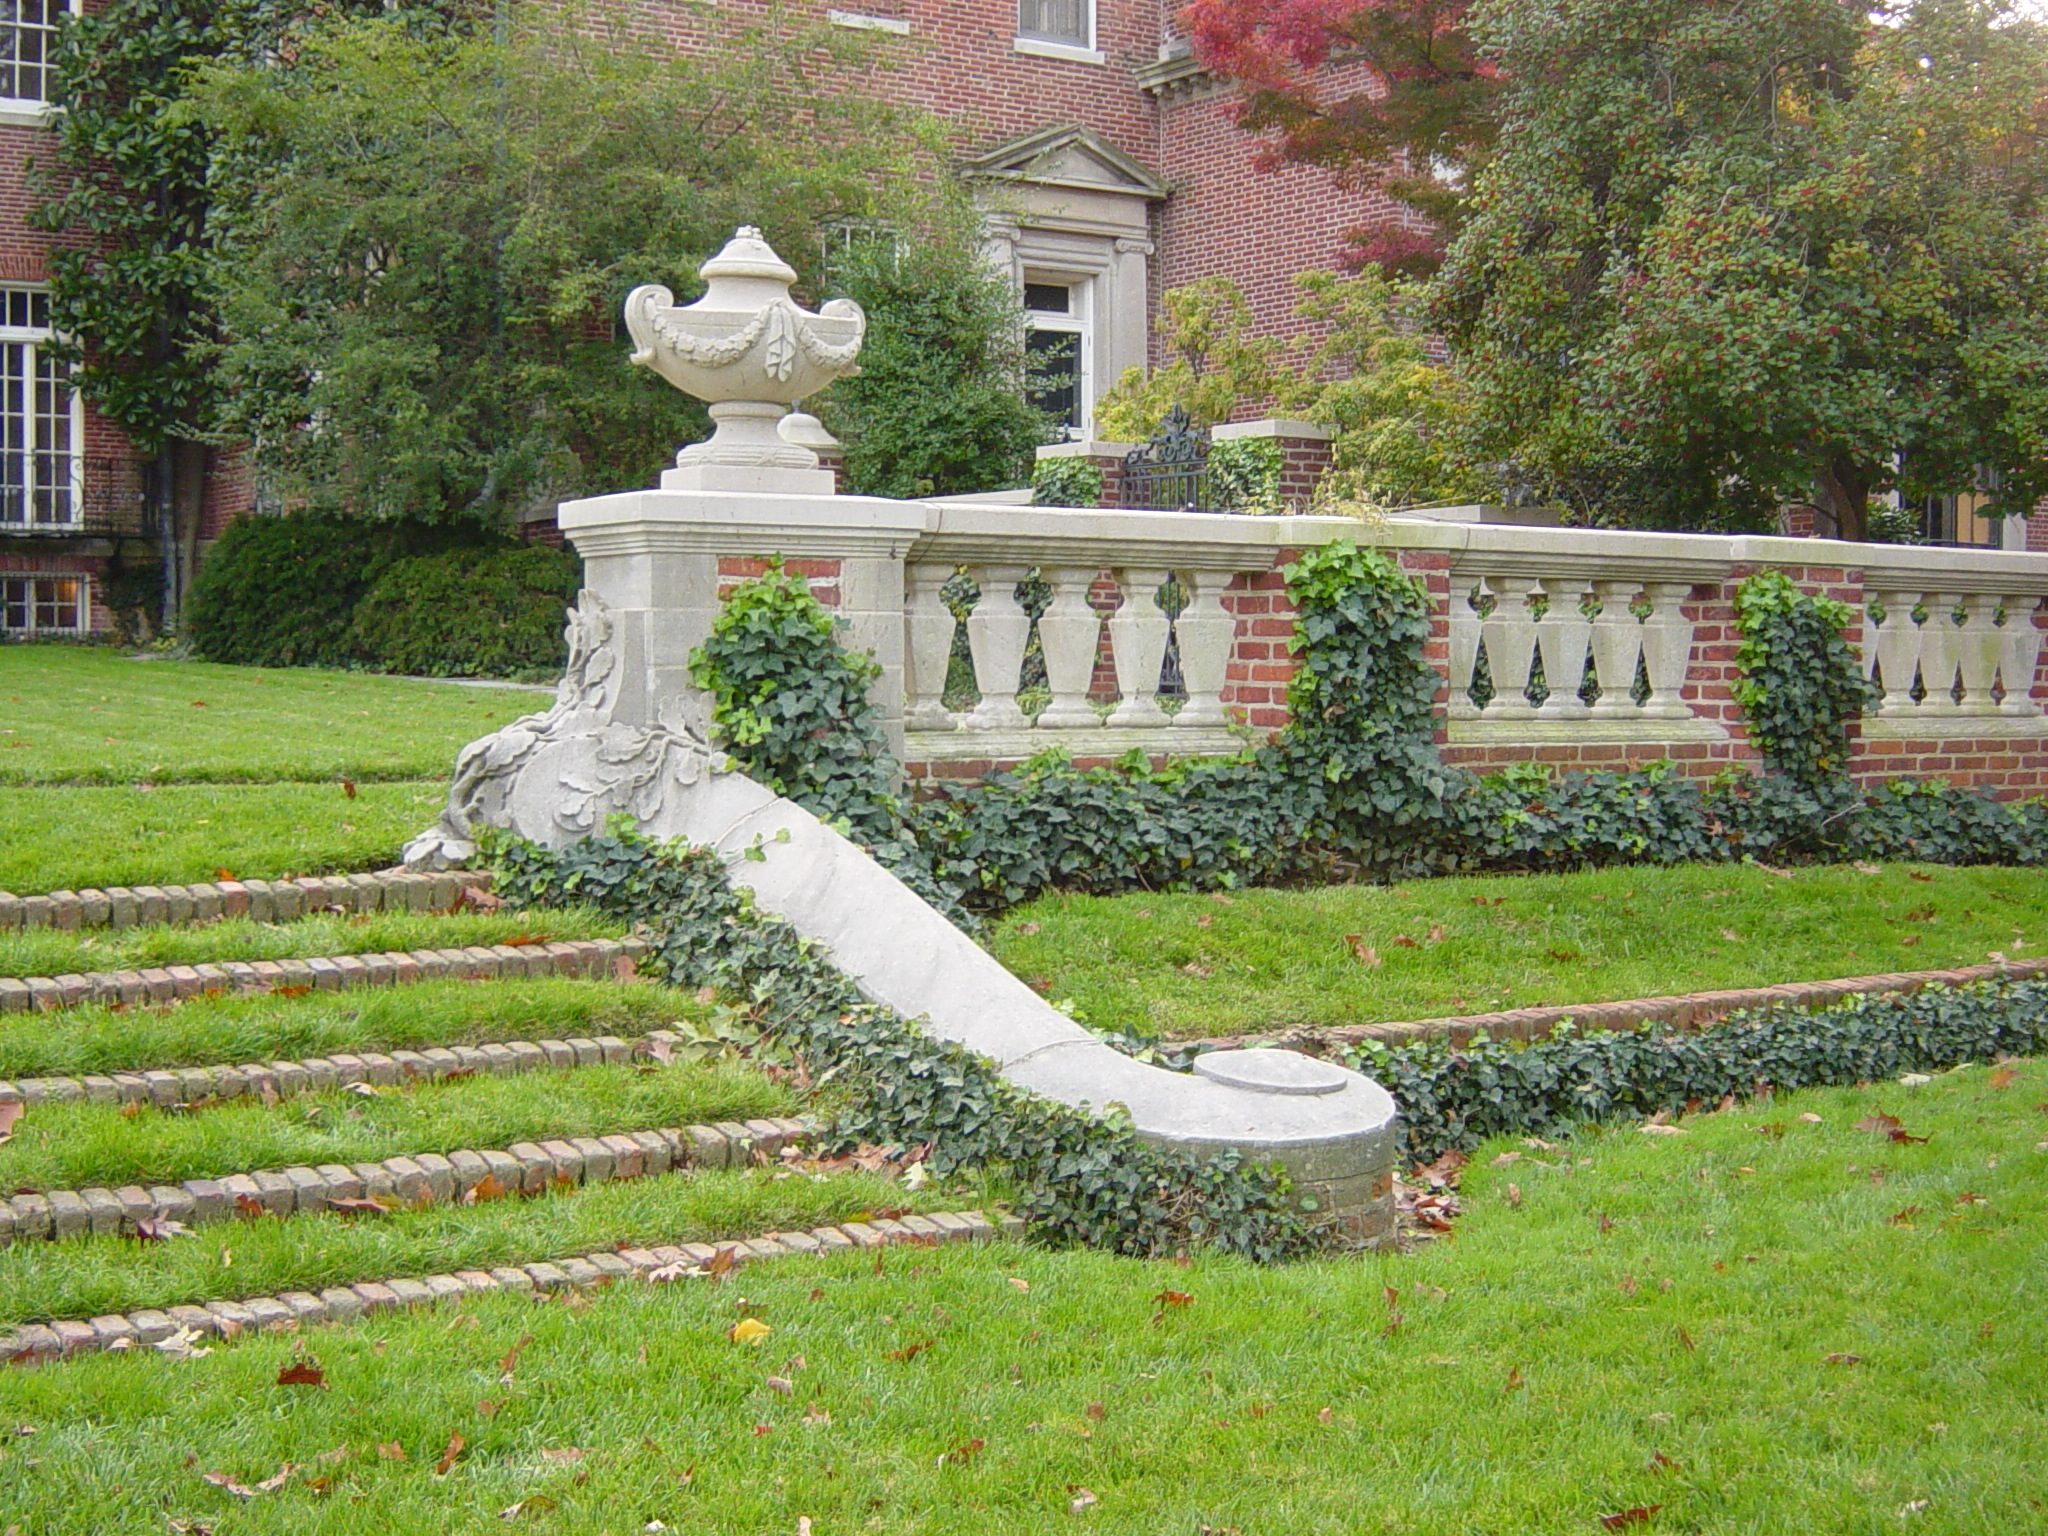 Intreegue Garden of the Month: Explore the Beauty of Dumbarton Oaks